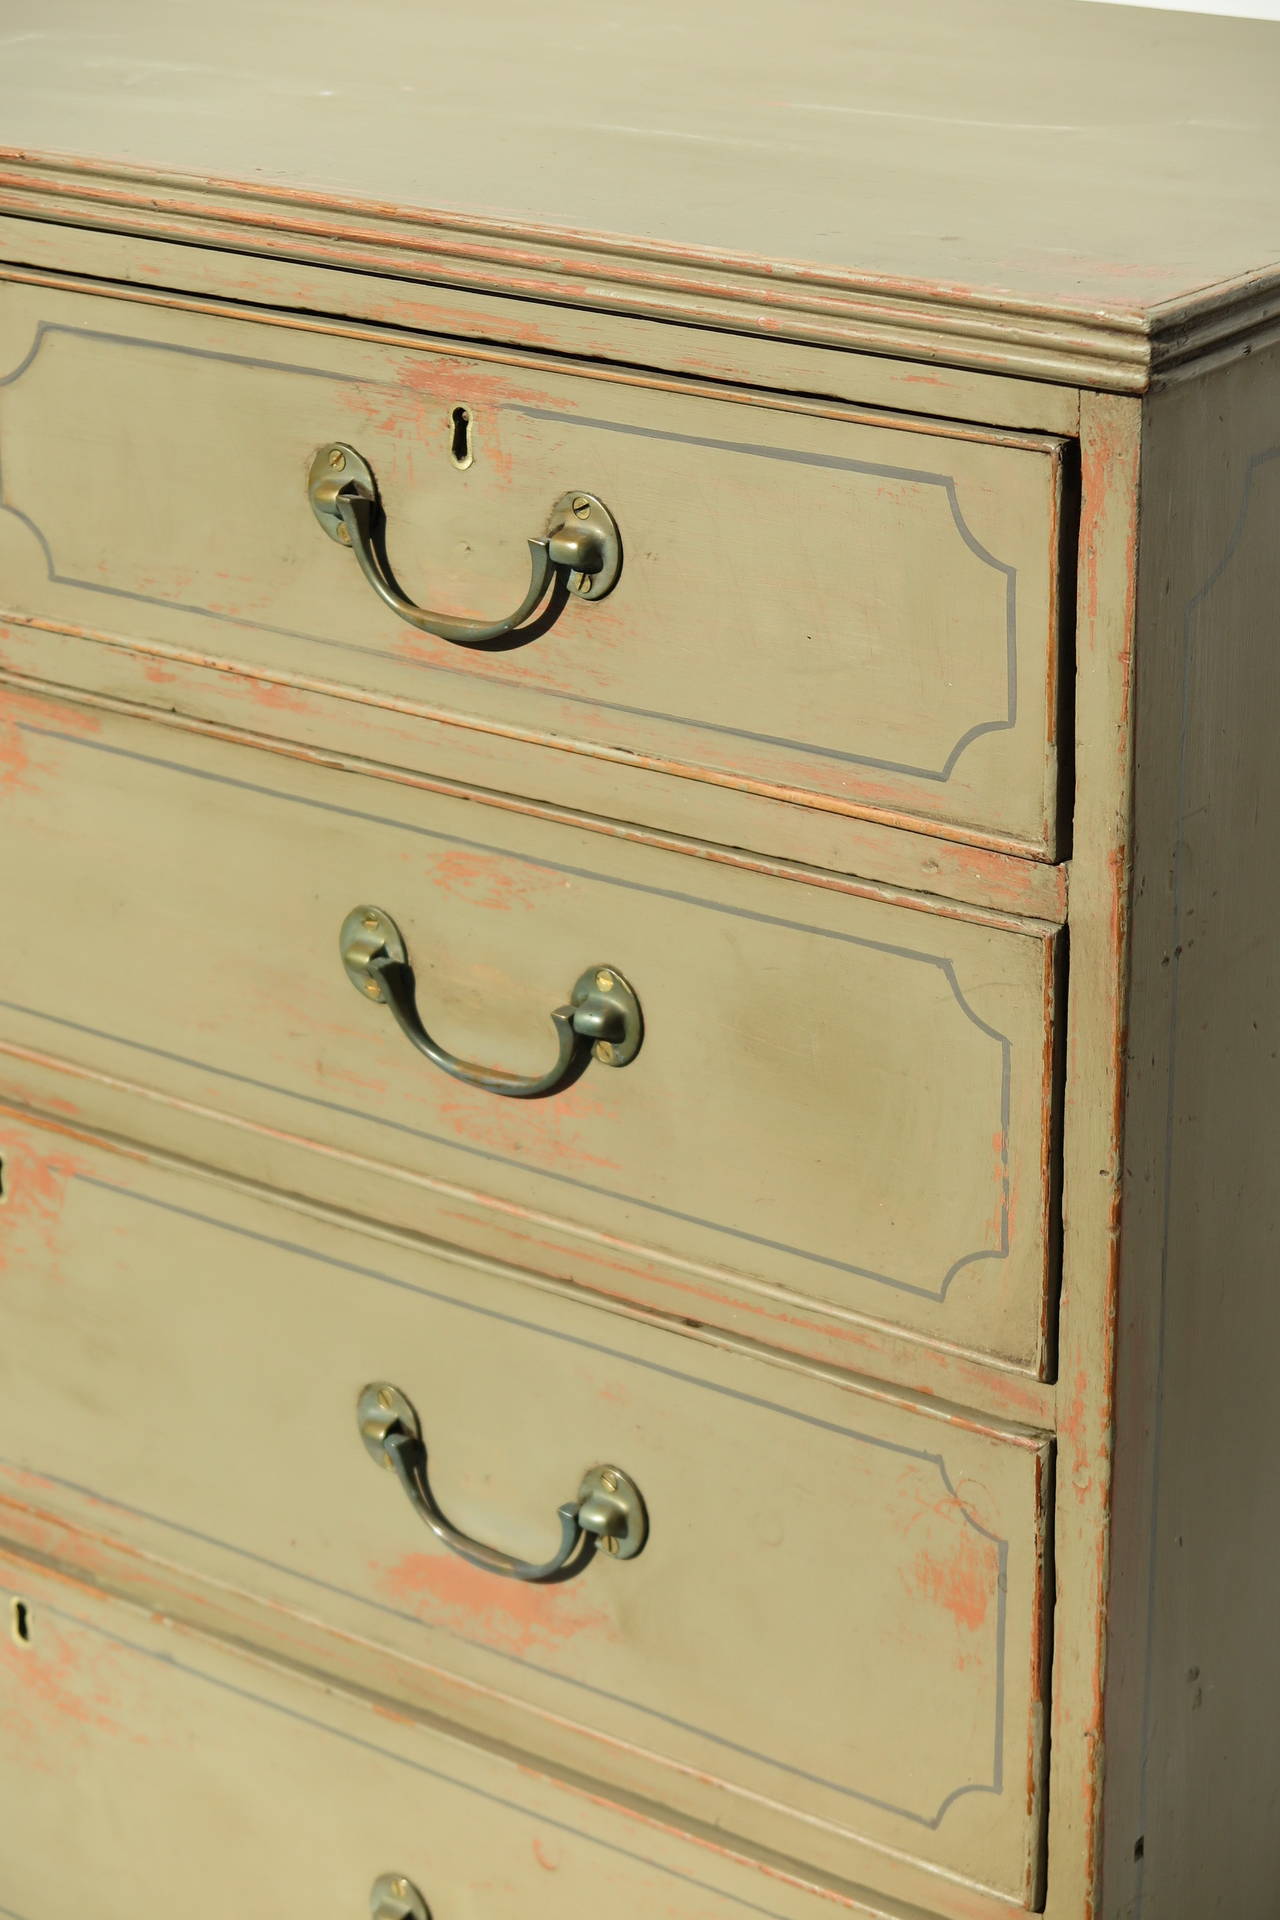 20th Century Painted Chest of Drawers